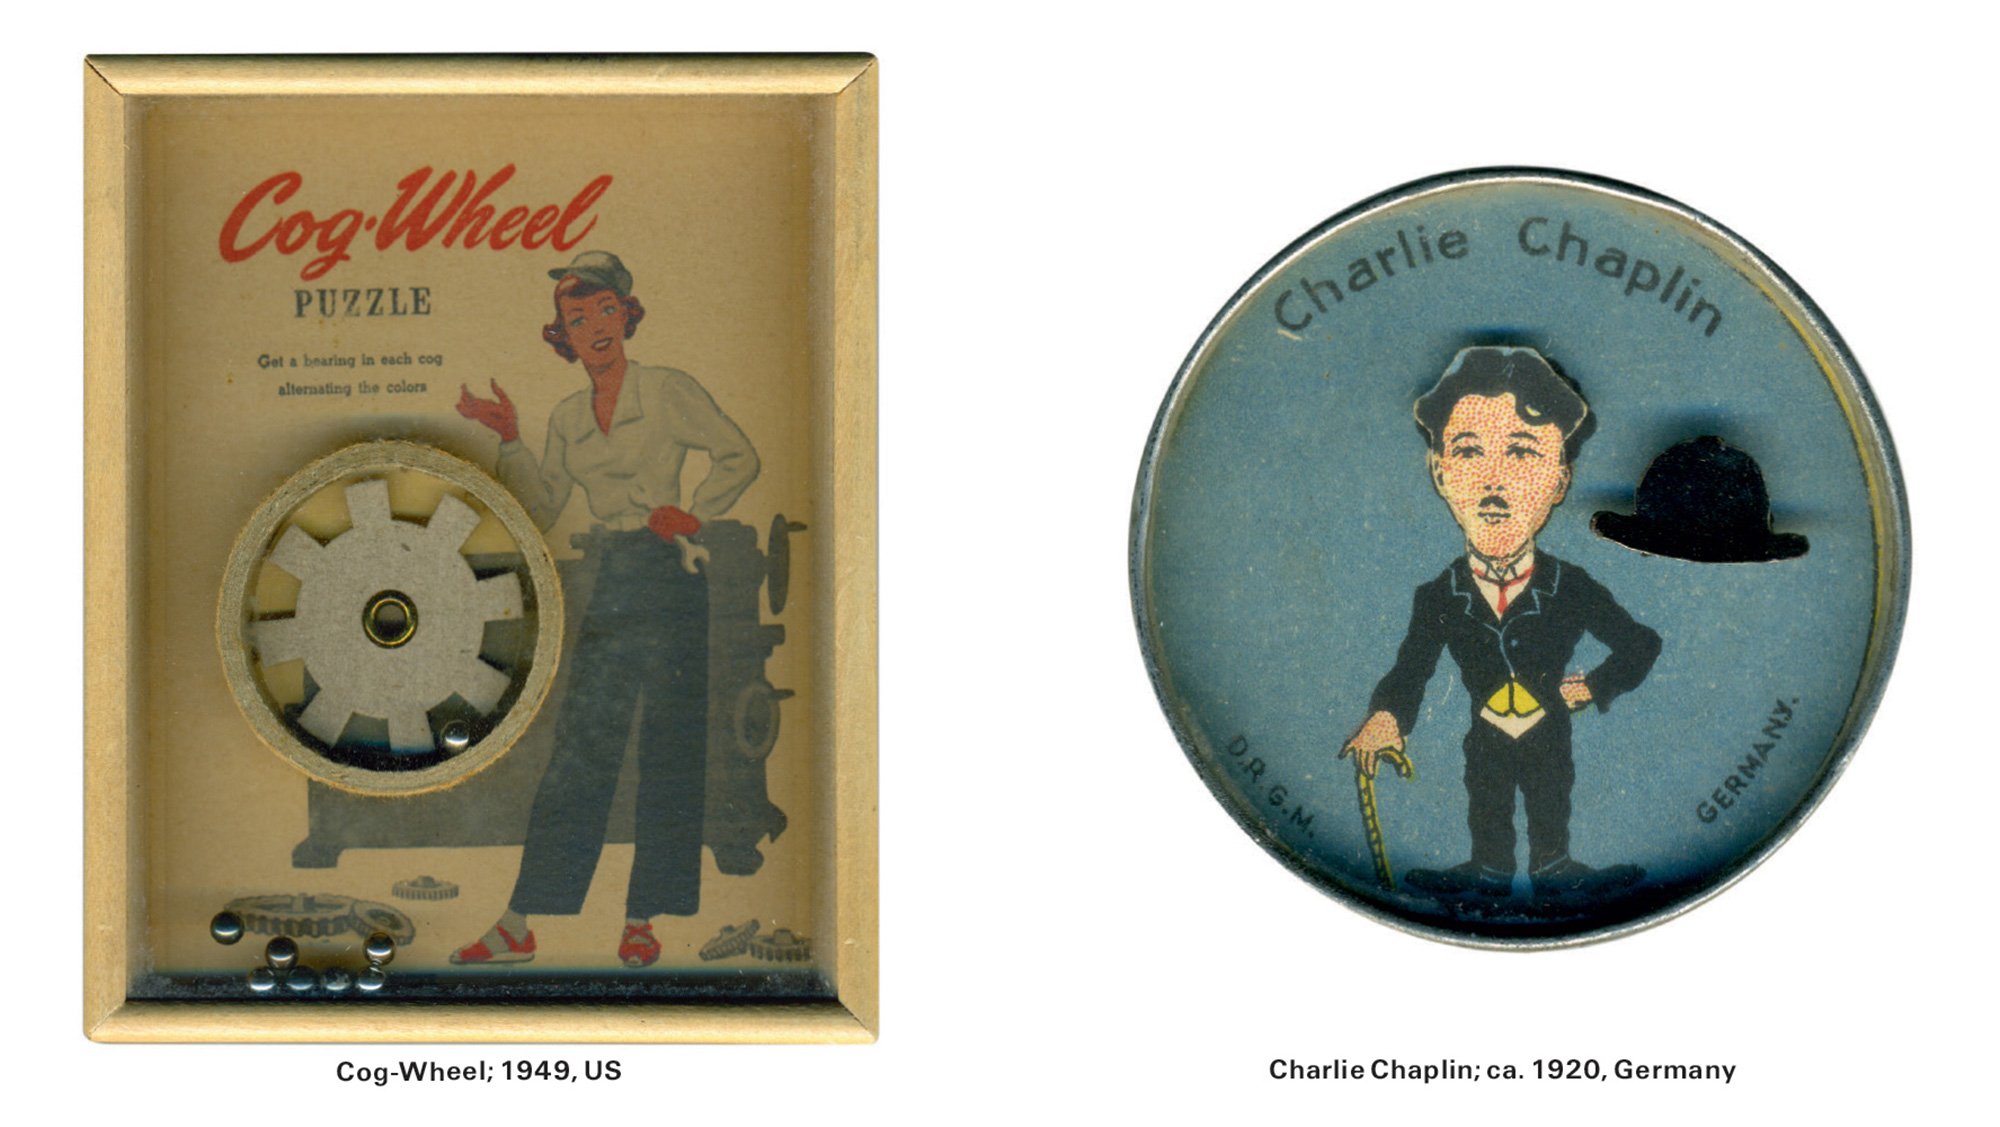 Two dexterity games: “Cog Wheel” from circa nineteen forty-nine and “Charlie Chaplin” from circa nineteen twenty.